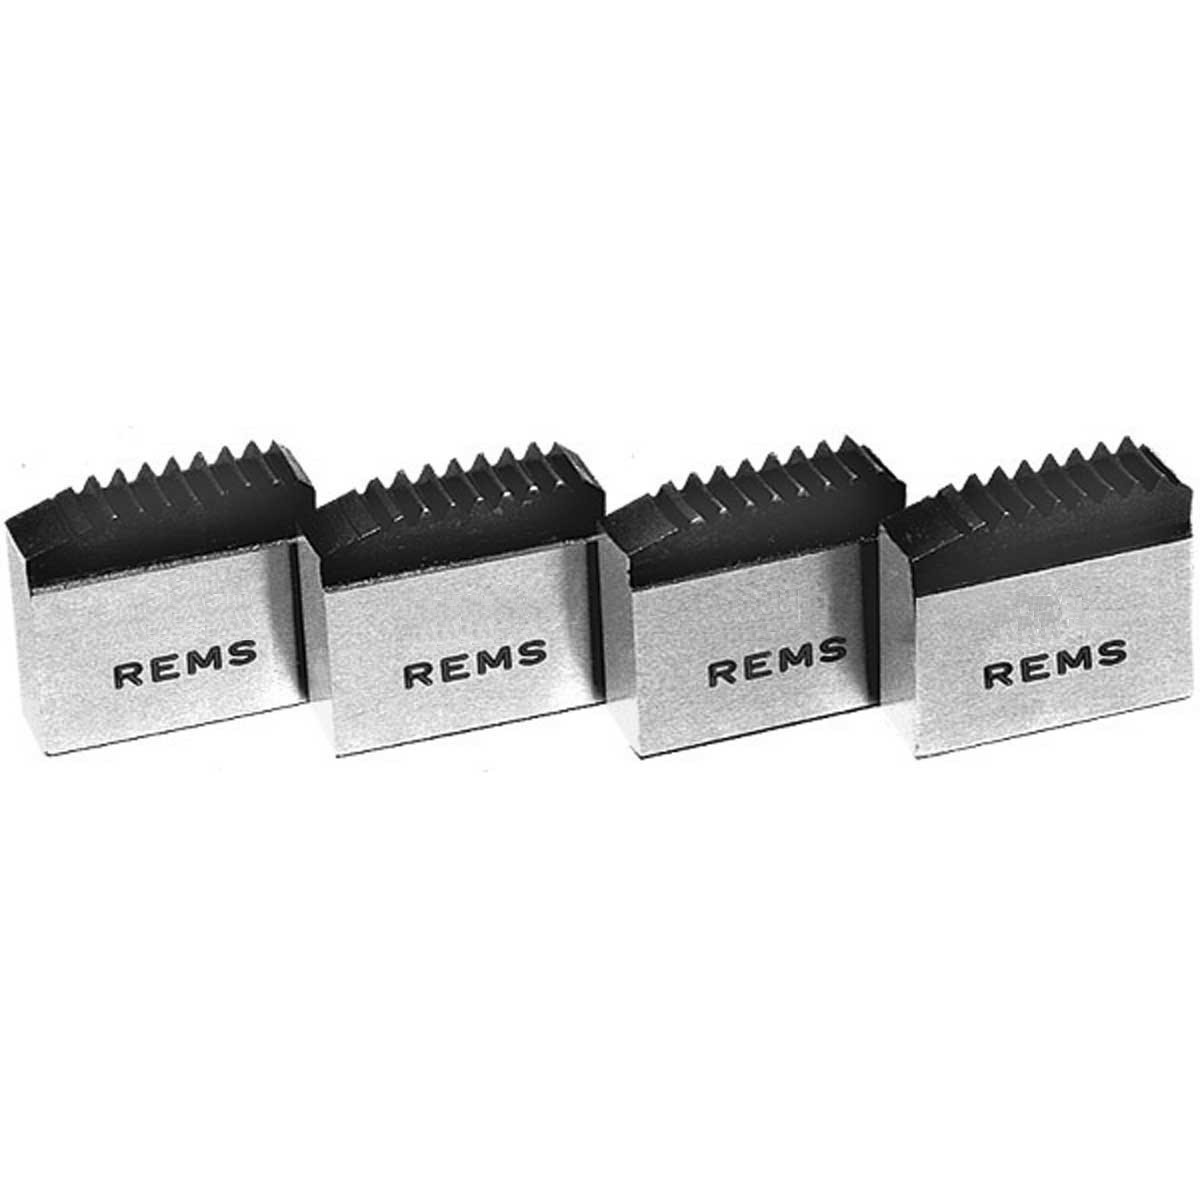 REMS - 1" Replacement Die Set, 521252